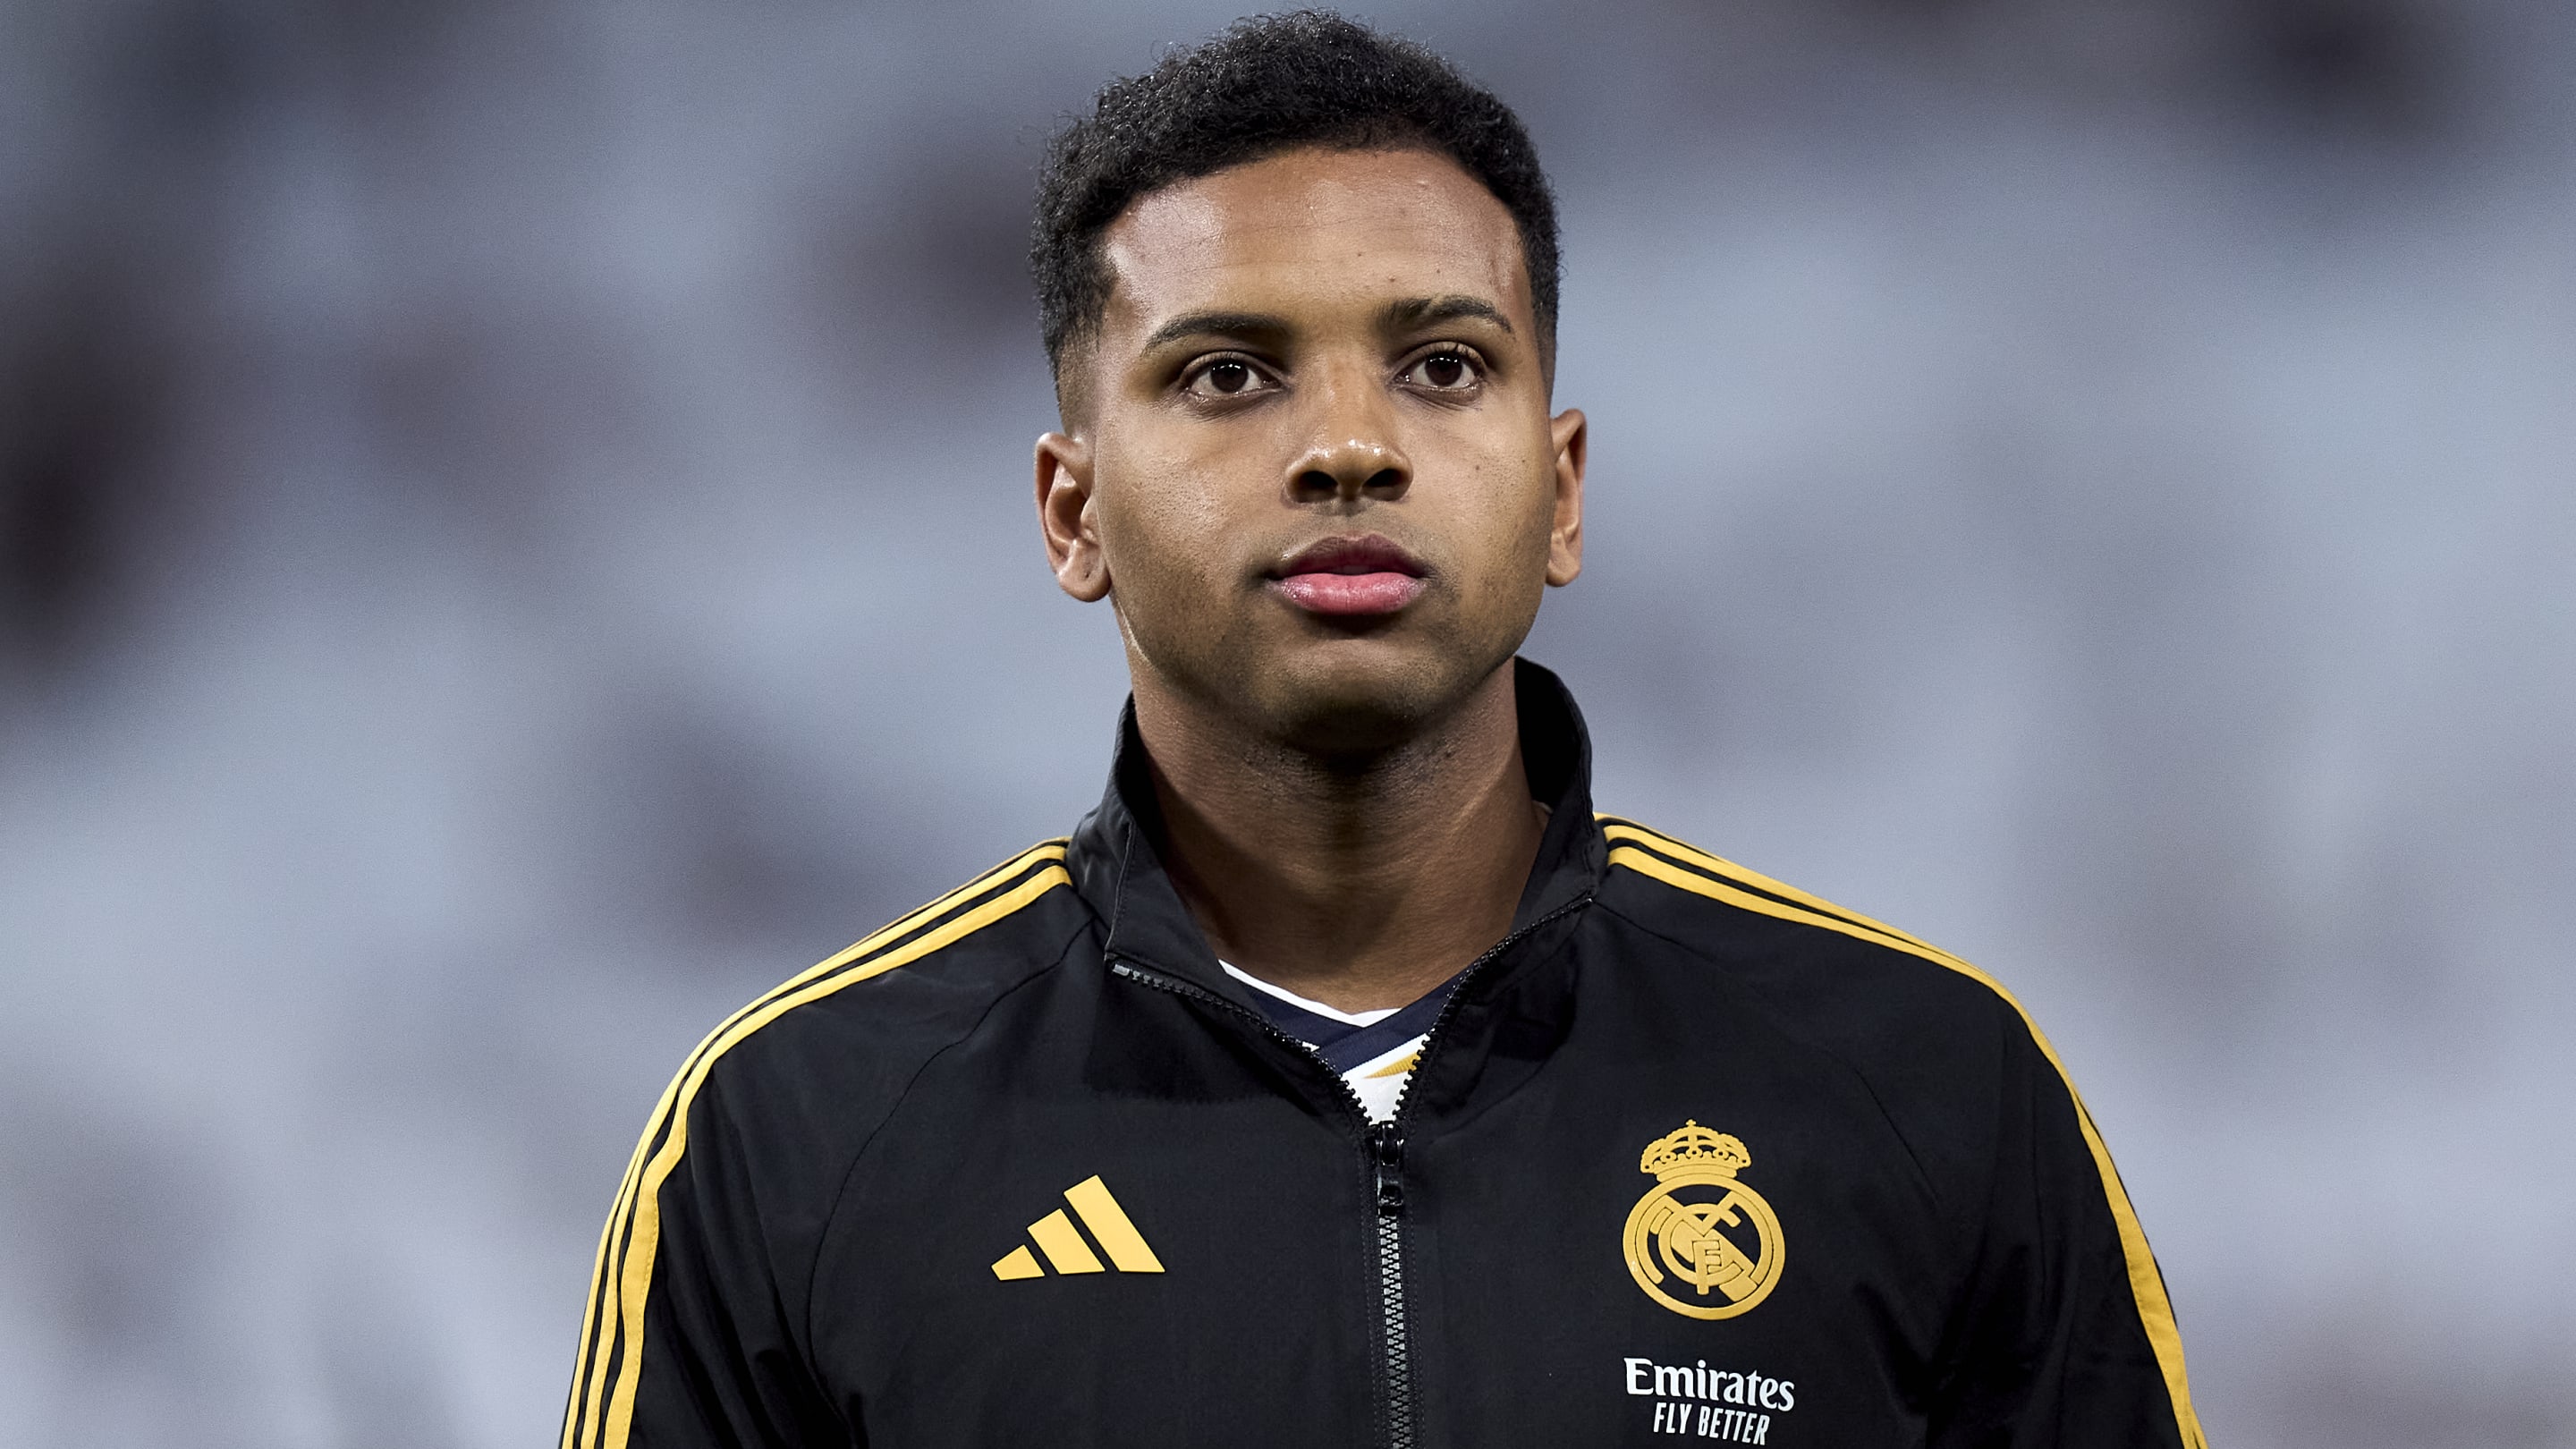 Man City 'interested' in Rodrygo ahead of Kylian Mbappe's Real Madrid switch